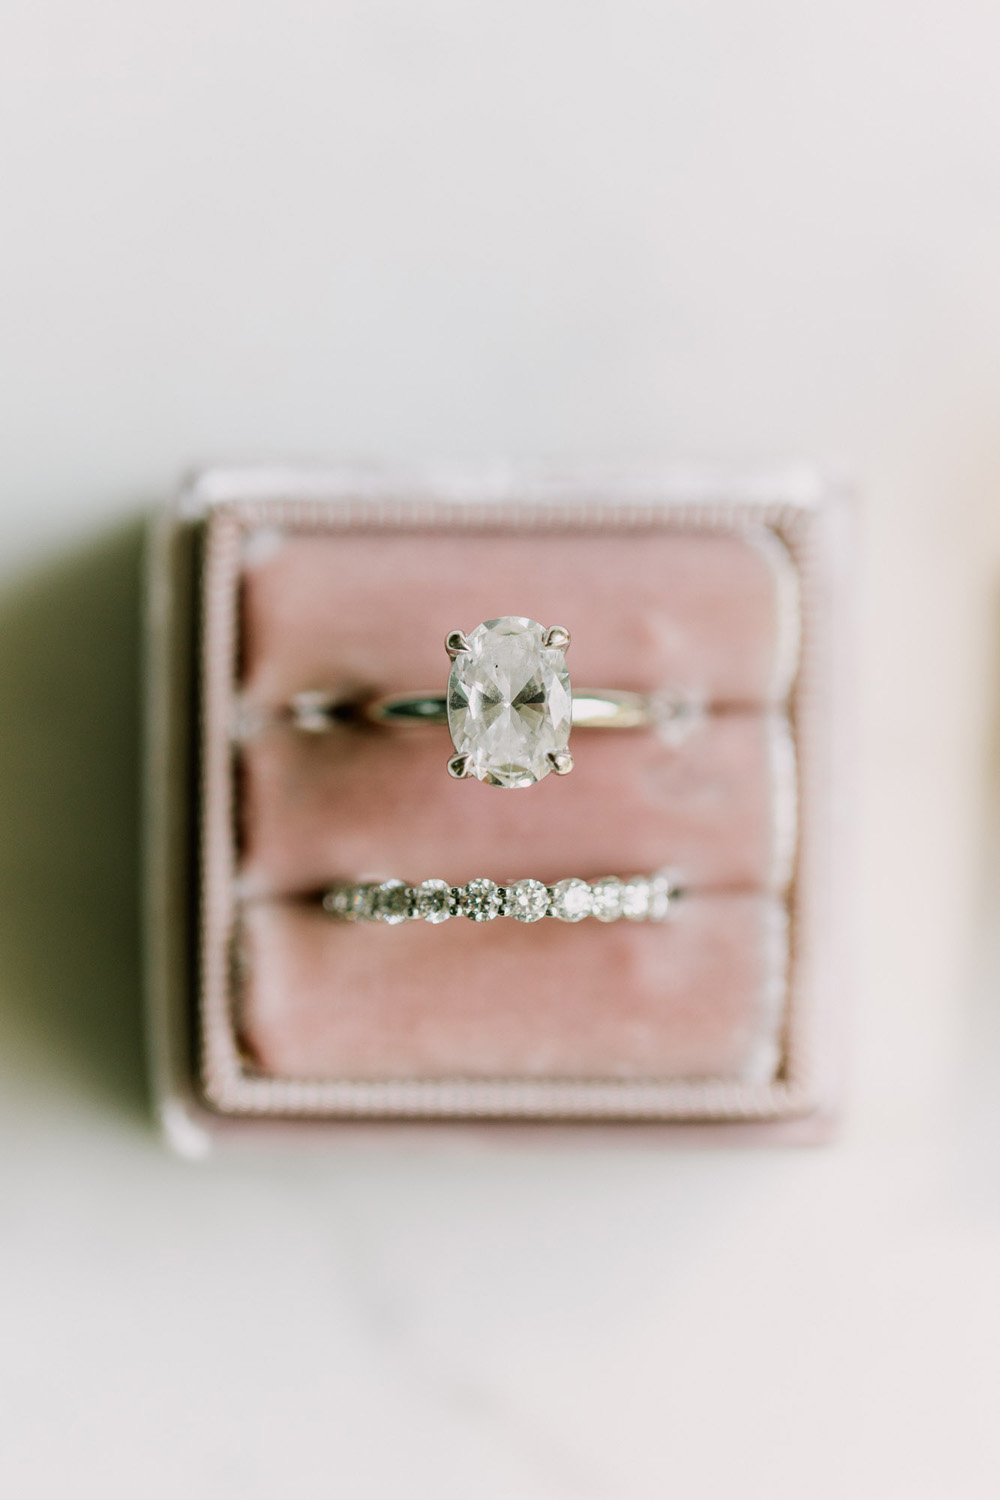 Glam engagement and wedding rings